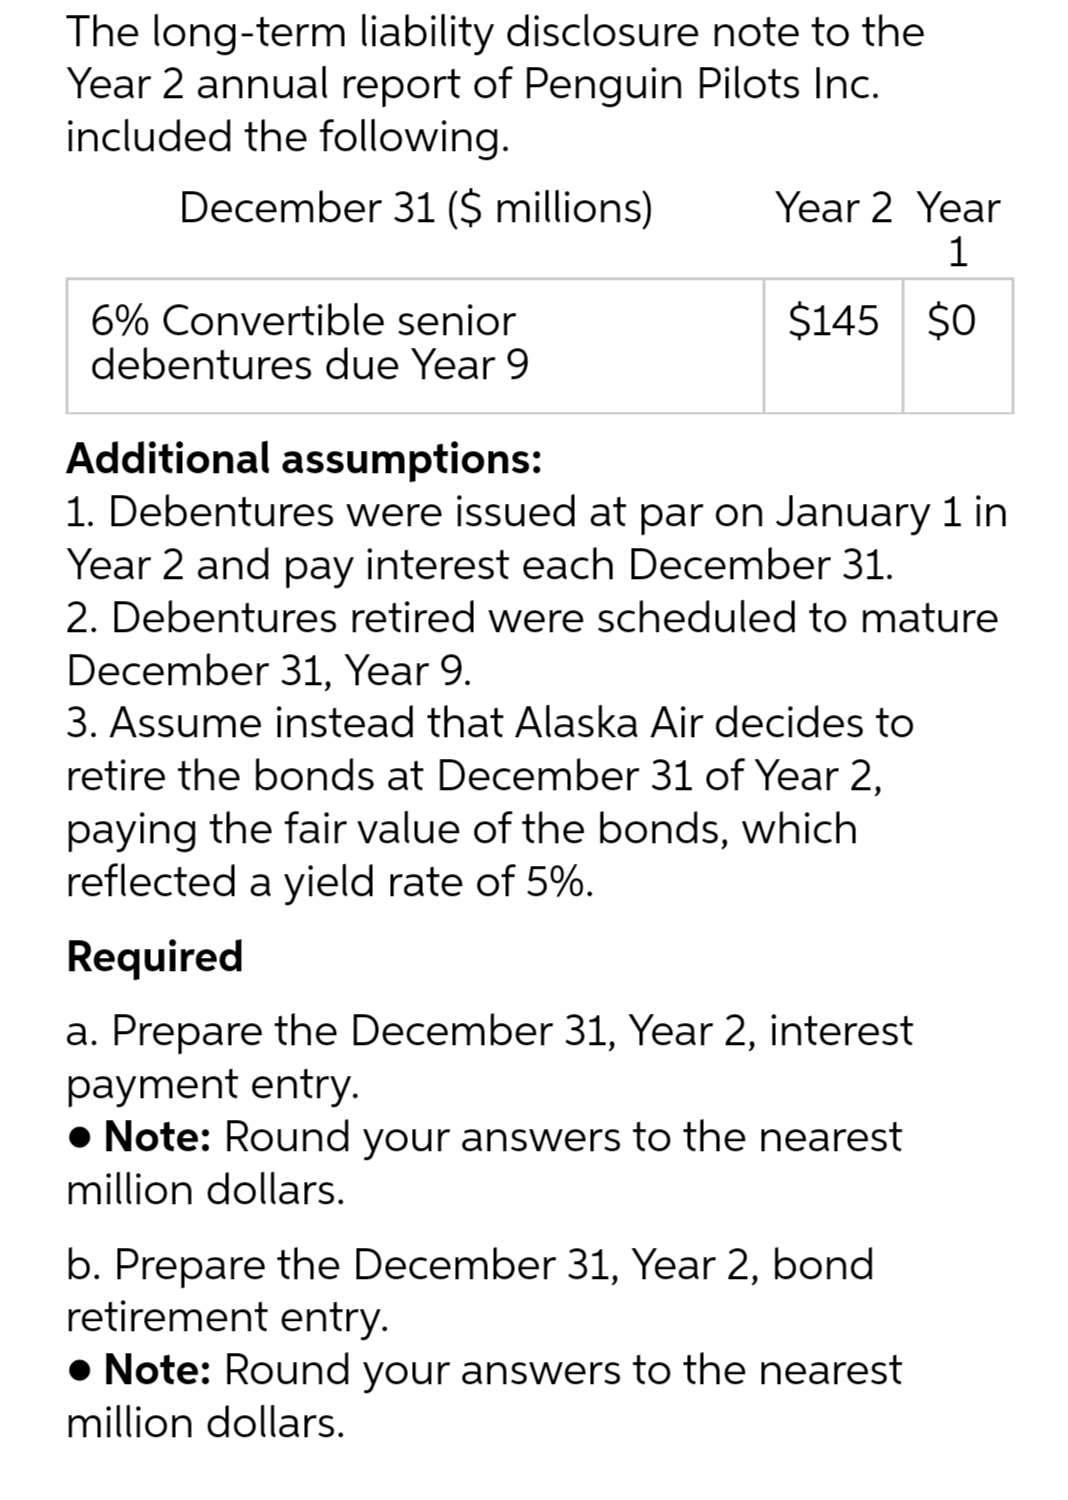 The long-term liability disclosure note to the
Year 2 annual report of Penguin Pilots Inc.
included the following.
December 31 ($ millions)
6% Convertible senior
debentures due Year 9
Year 2 Year
1
$145 $0
Additional assumptions:
1. Debentures were issued at par on January 1 in
Year 2 and pay interest each December 31.
2. Debentures retired were scheduled to mature
December 31, Year 9.
3. Assume instead that Alaska Air decides to
retire the bonds at December 31 of Year 2,
paying the fair value of the bonds, which
reflected a yield rate of 5%.
Required
a. Prepare the December 31, Year 2, interest
payment entry.
● Note: Round your answers to the nearest
million dollars.
b. Prepare the December 31, Year 2, bond
retirement entry.
● Note: Round your answers to the nearest
million dollars.